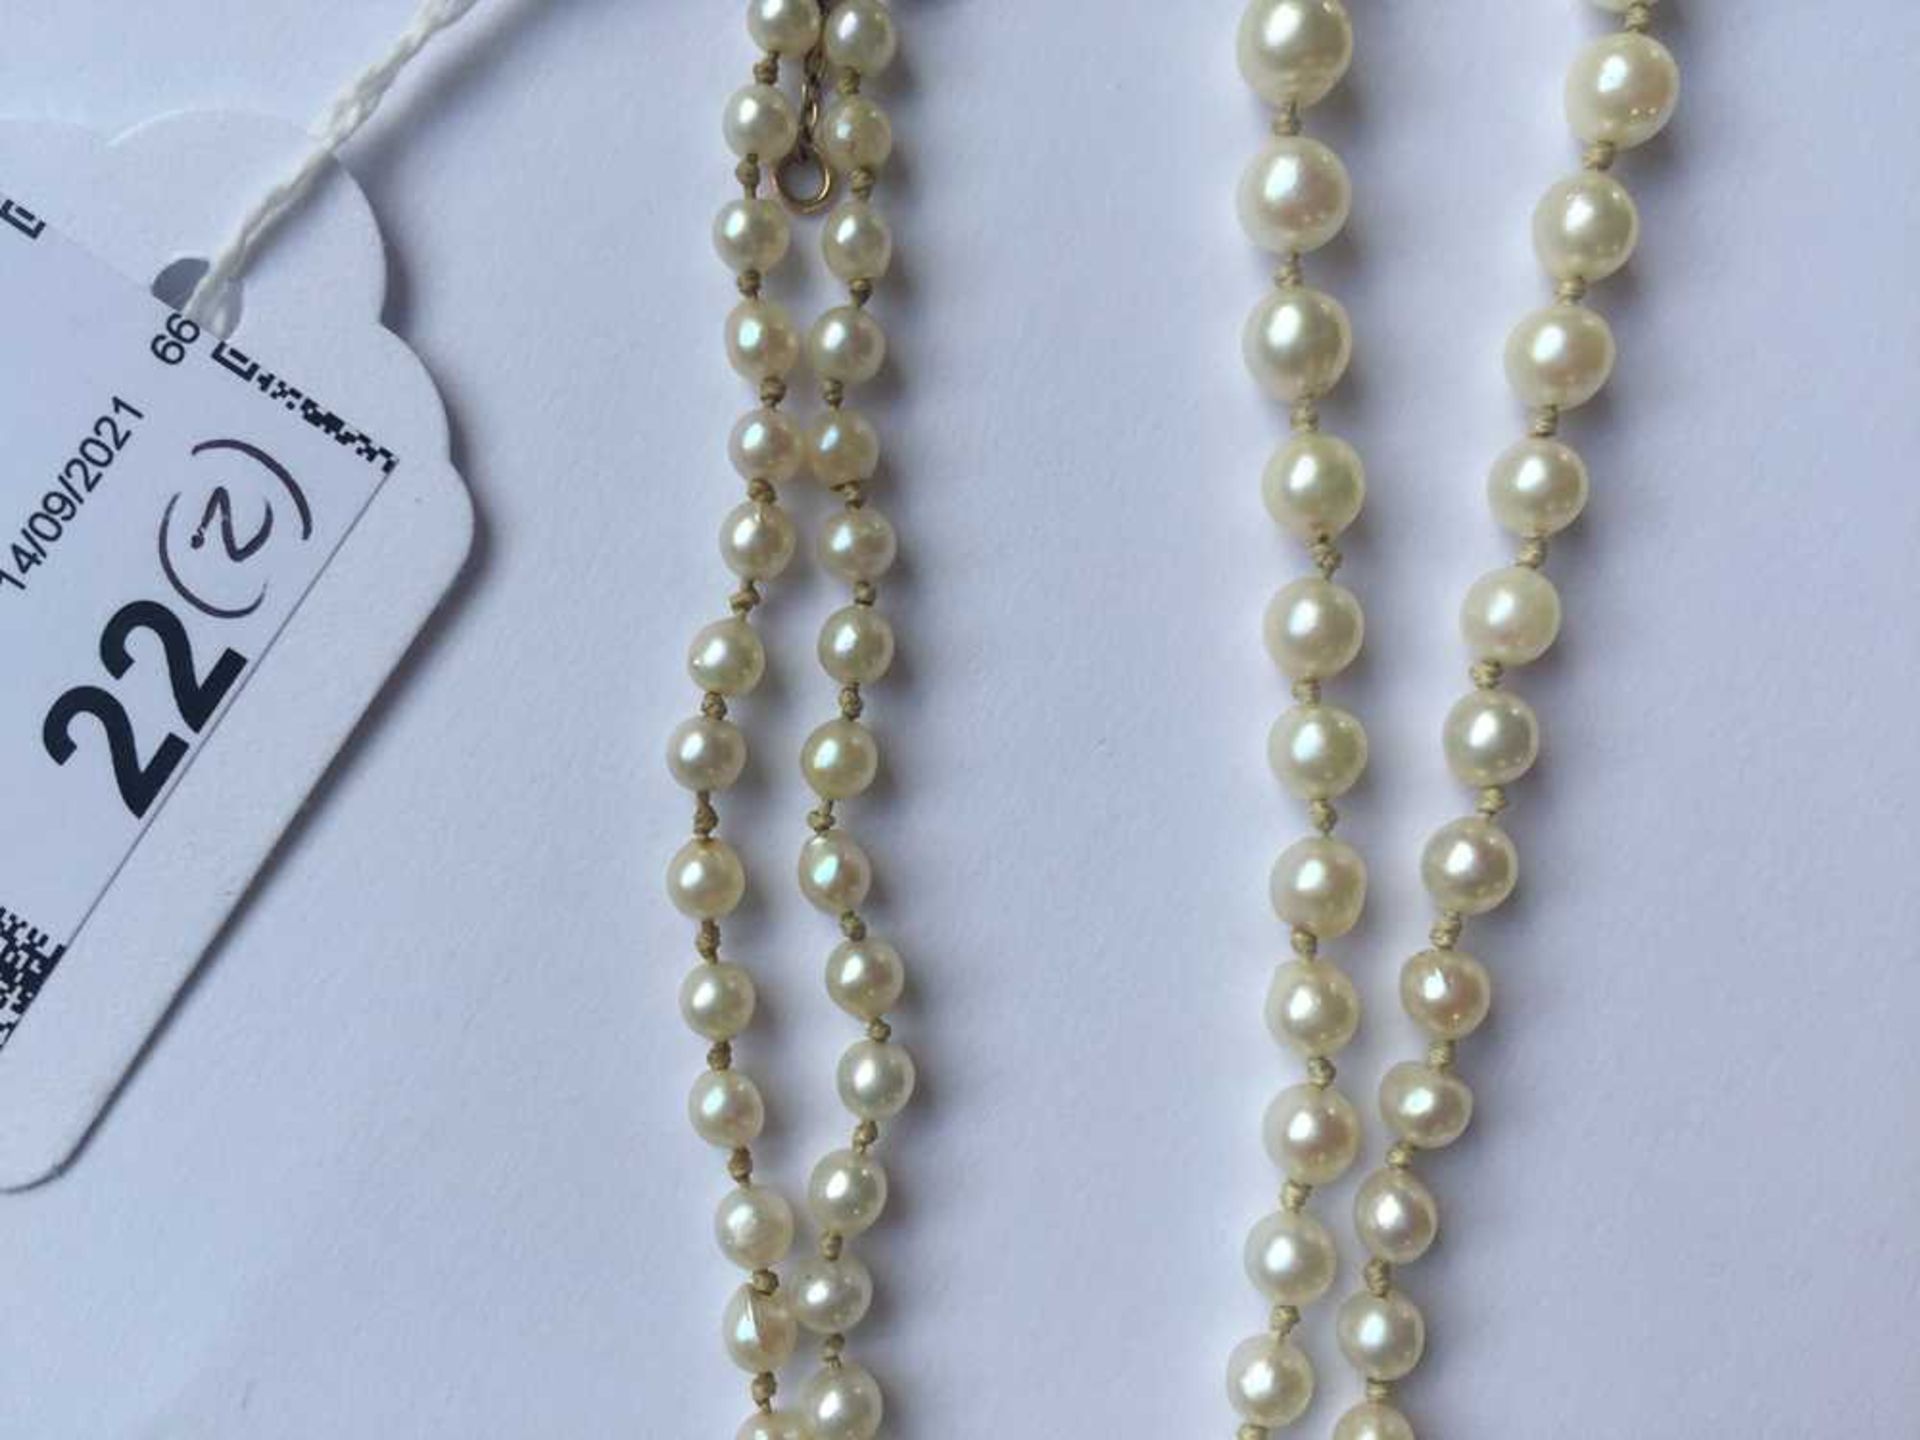 A natural saltwater pearl necklace - Image 13 of 13